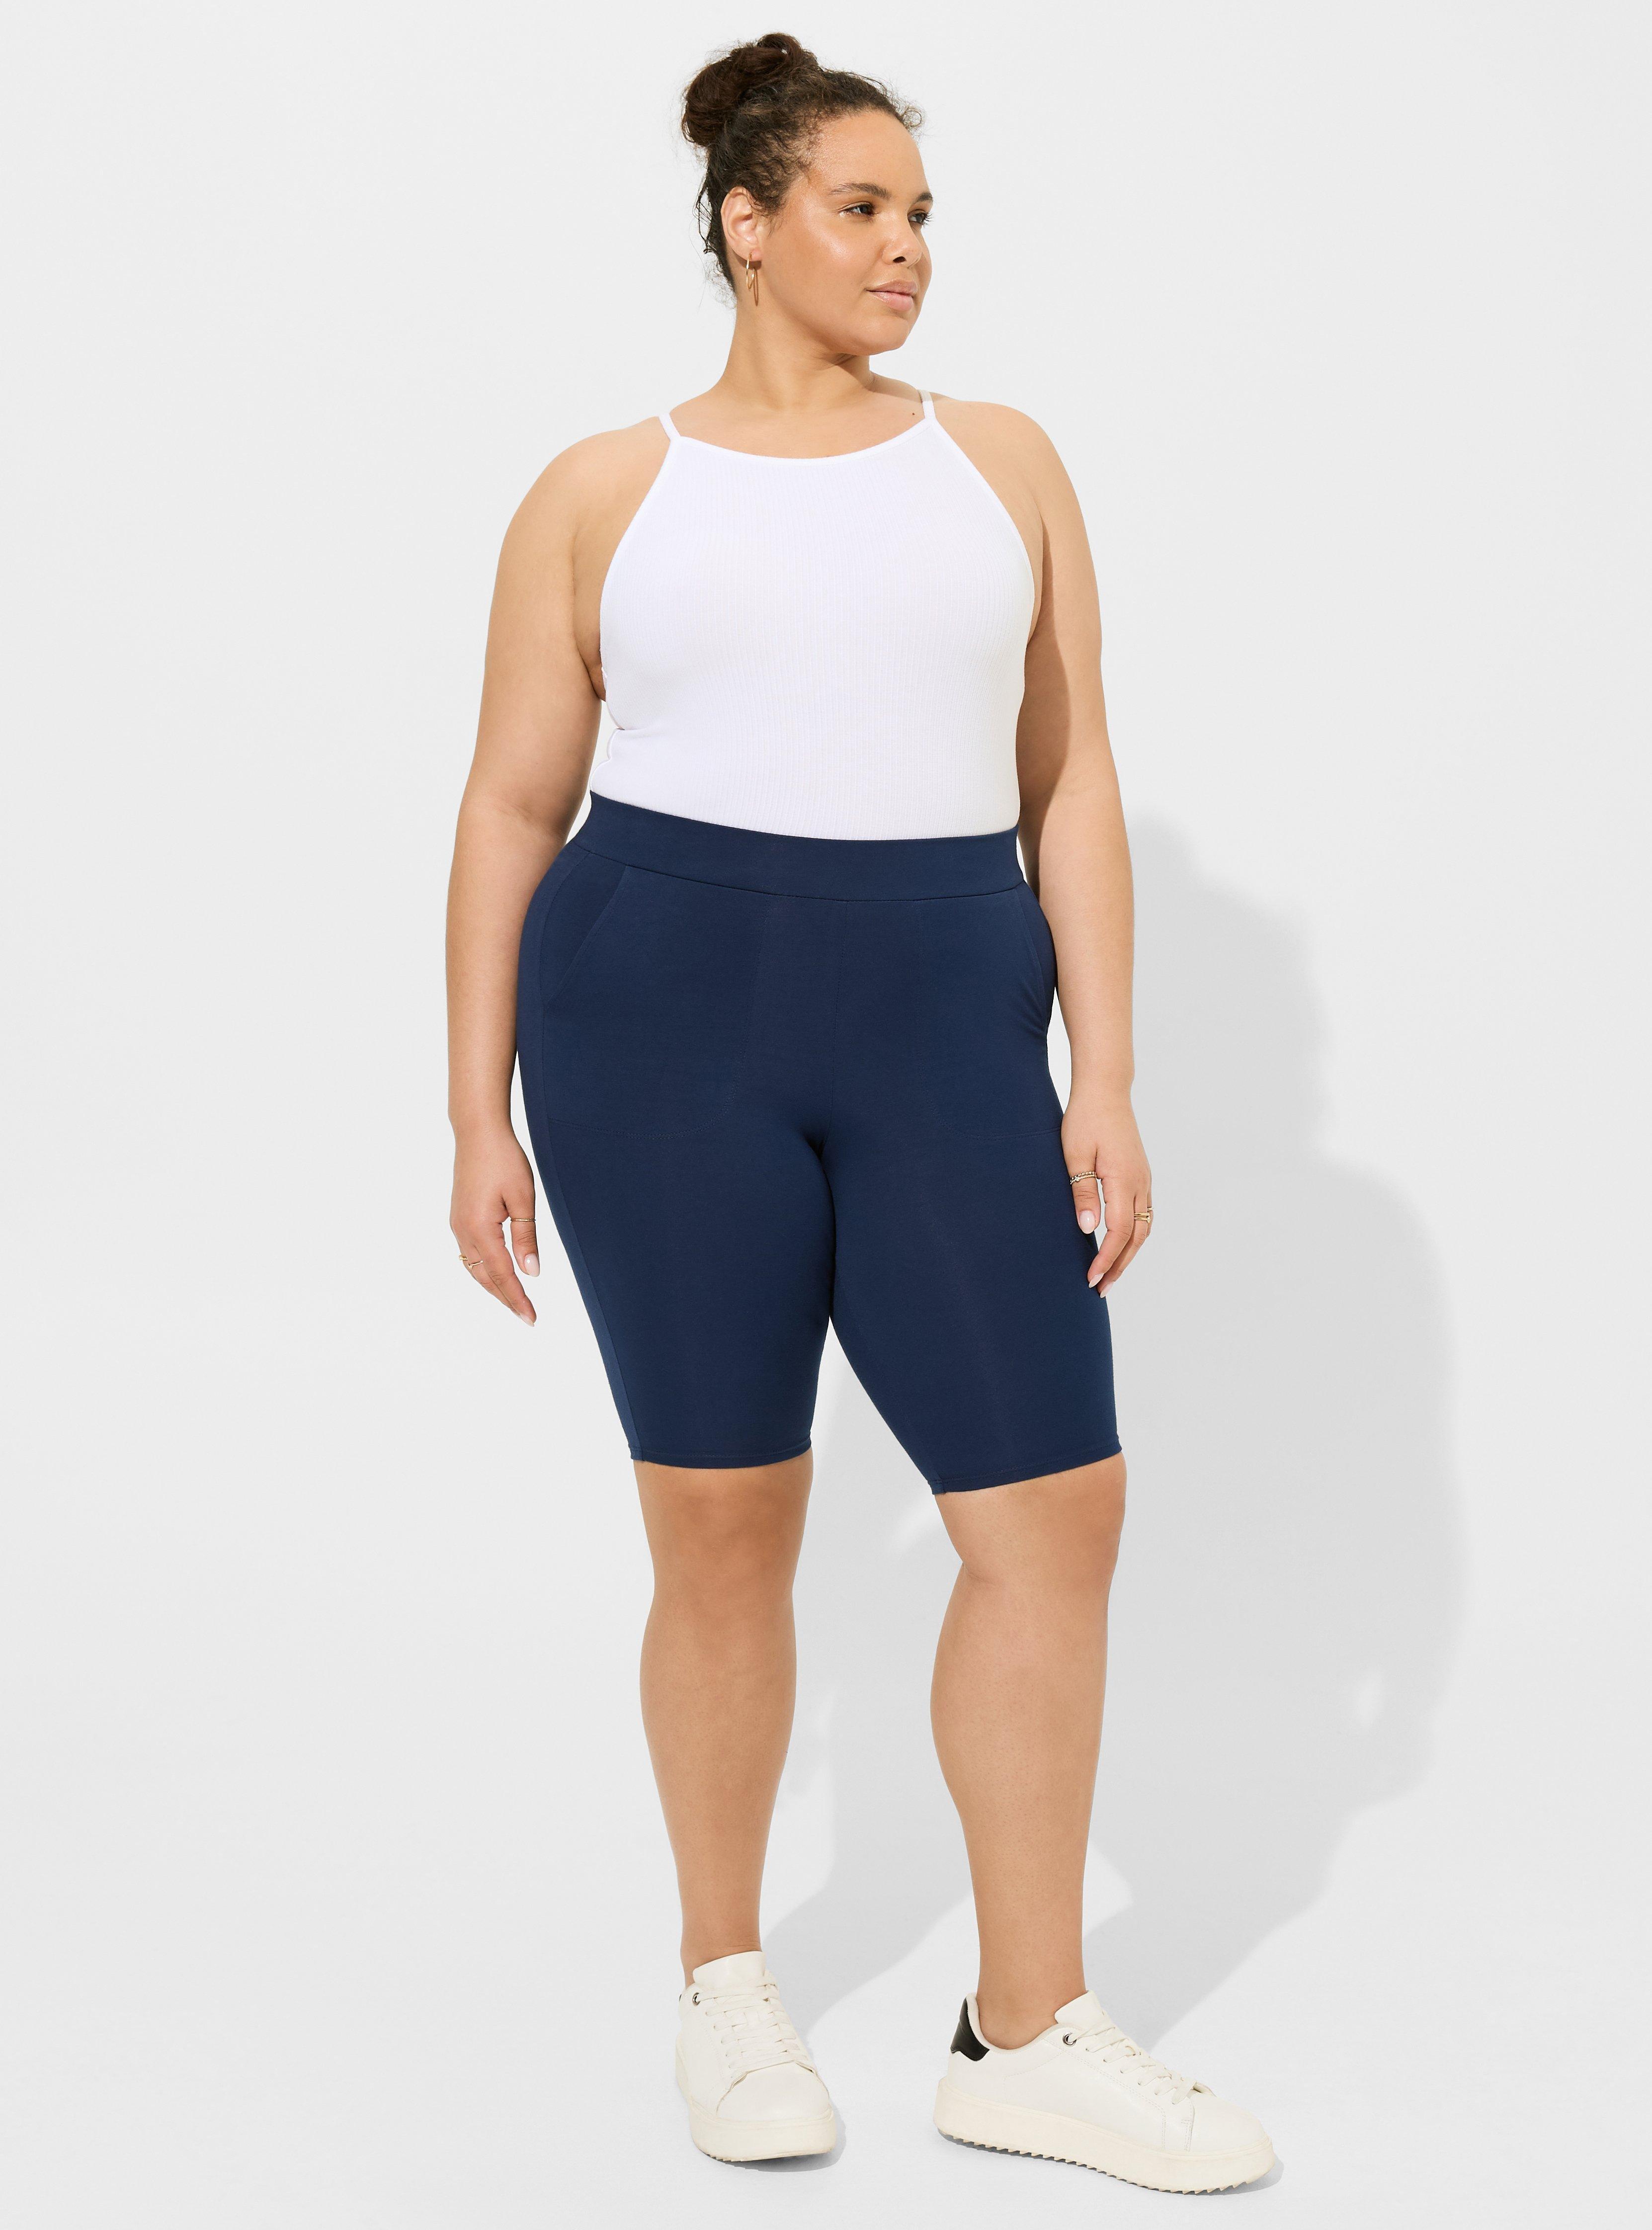 Stretchy Work Pants For Plus Size